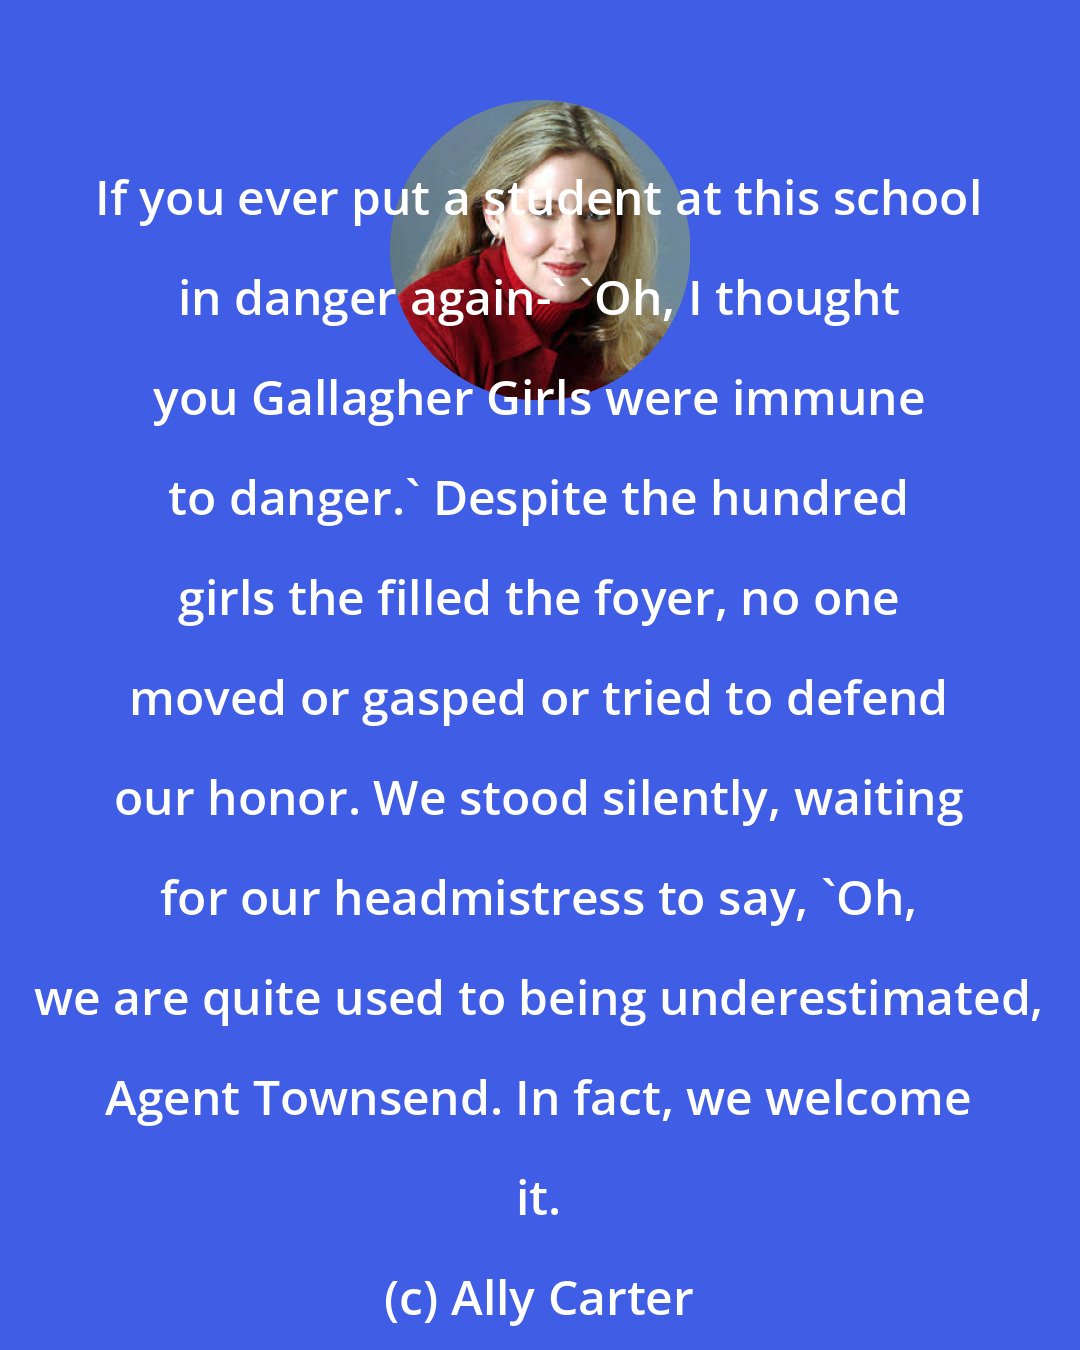 Ally Carter: If you ever put a student at this school in danger again-' 'Oh, I thought you Gallagher Girls were immune to danger.' Despite the hundred girls the filled the foyer, no one moved or gasped or tried to defend our honor. We stood silently, waiting for our headmistress to say, 'Oh, we are quite used to being underestimated, Agent Townsend. In fact, we welcome it.